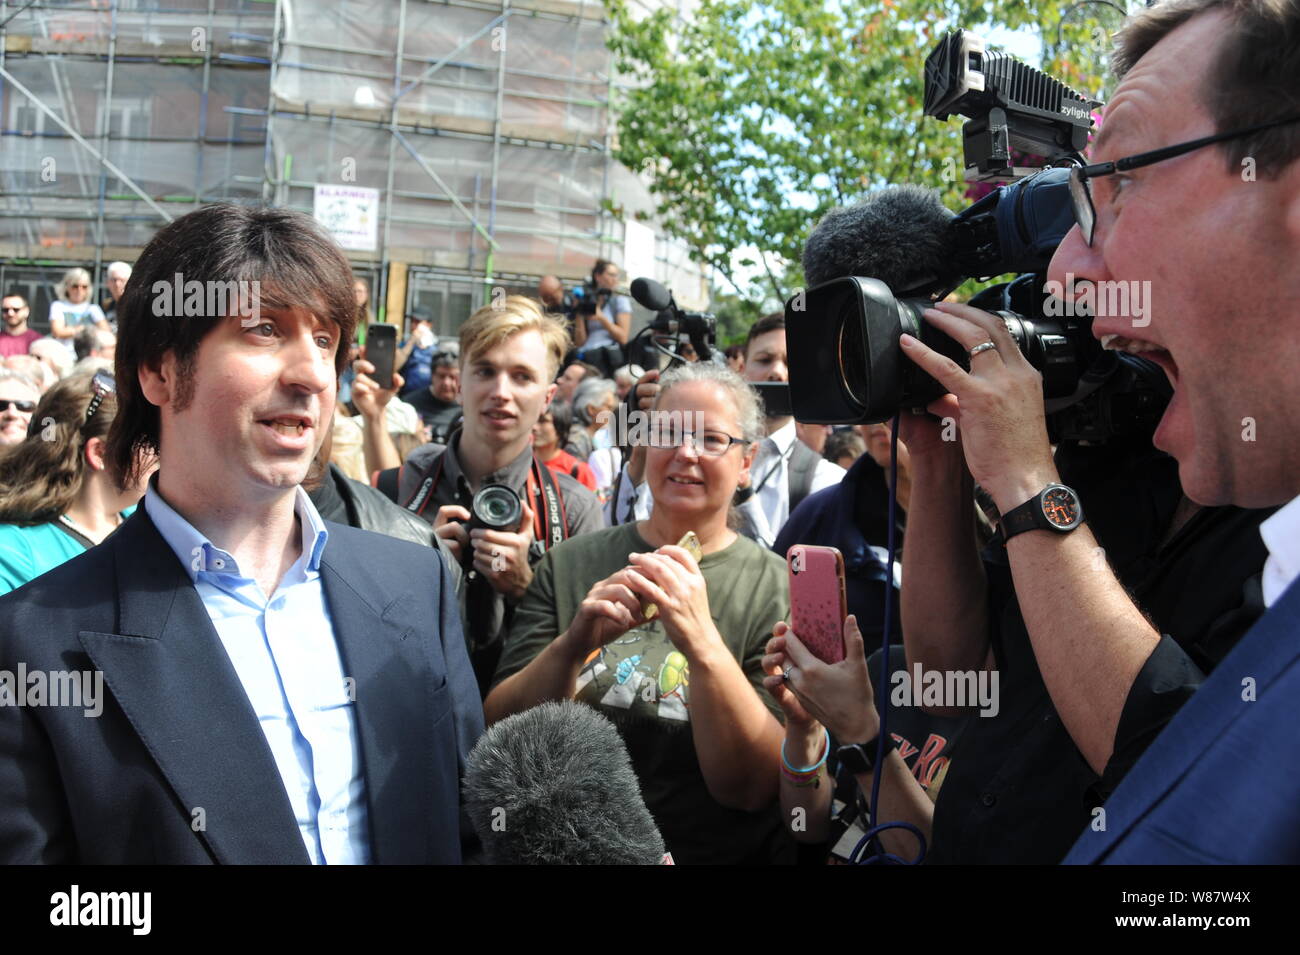 Crossing at Abbey Road, NW8, London, UK. 8th August, 2019. The Beatles tribute band arrive at the infamous Abbey Road crossing to celebrate the 50th anniversary of The Beatles album Abbey Road. Credit: David Bronstein/ Alamy Live News Stock Photo